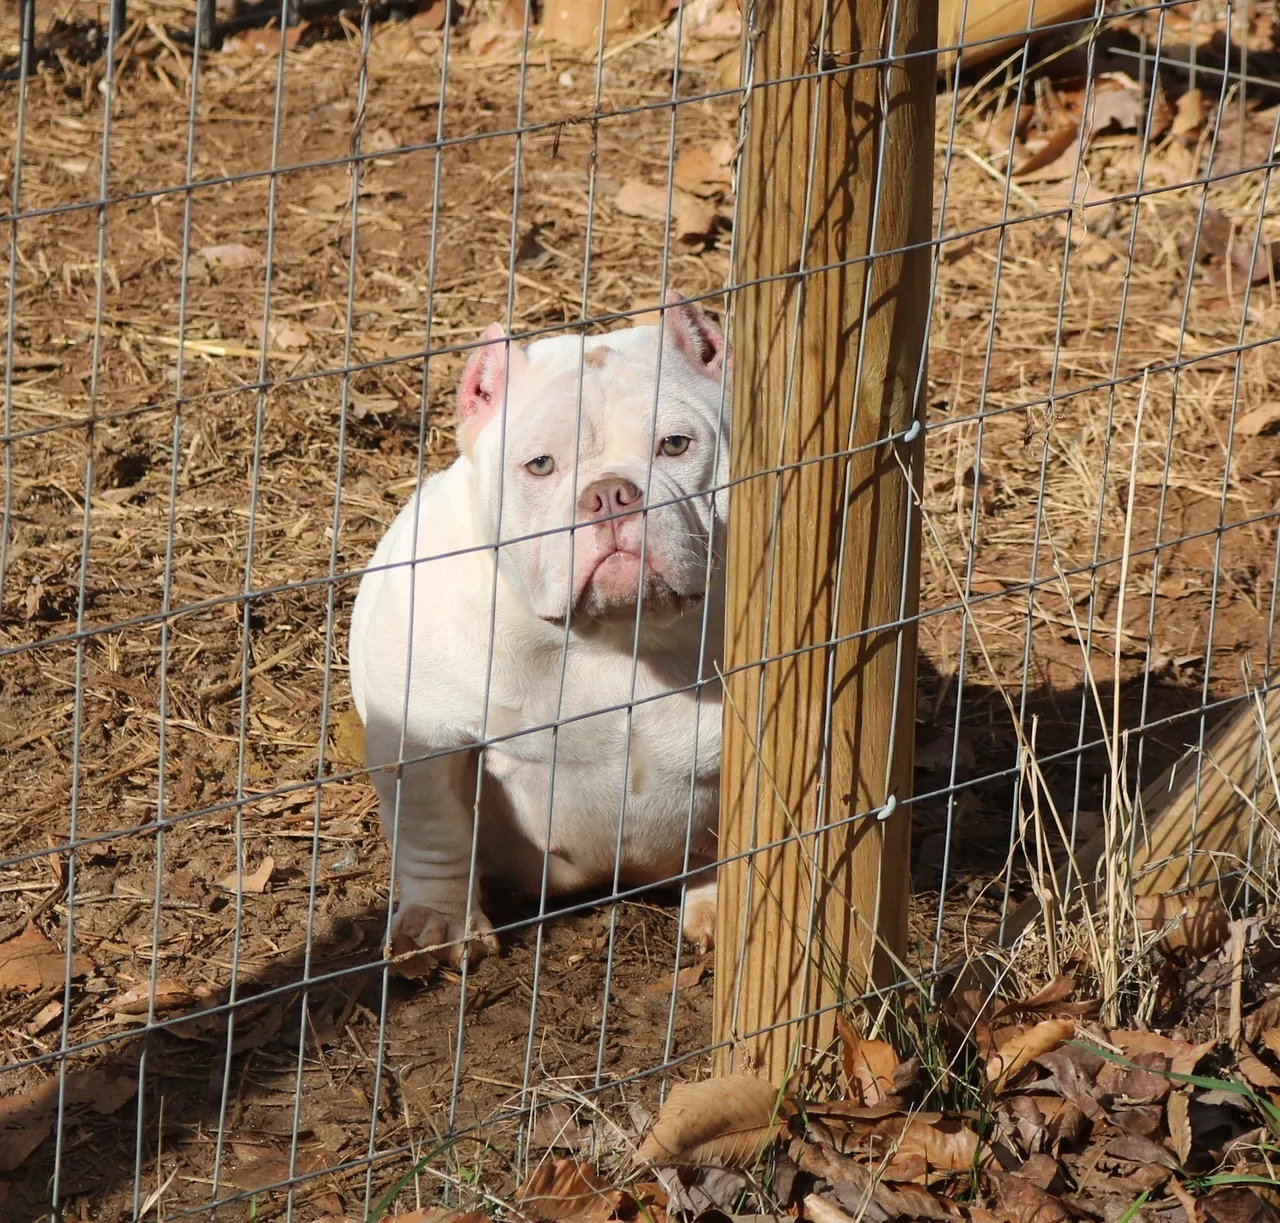 A white dog is standing behind a fence